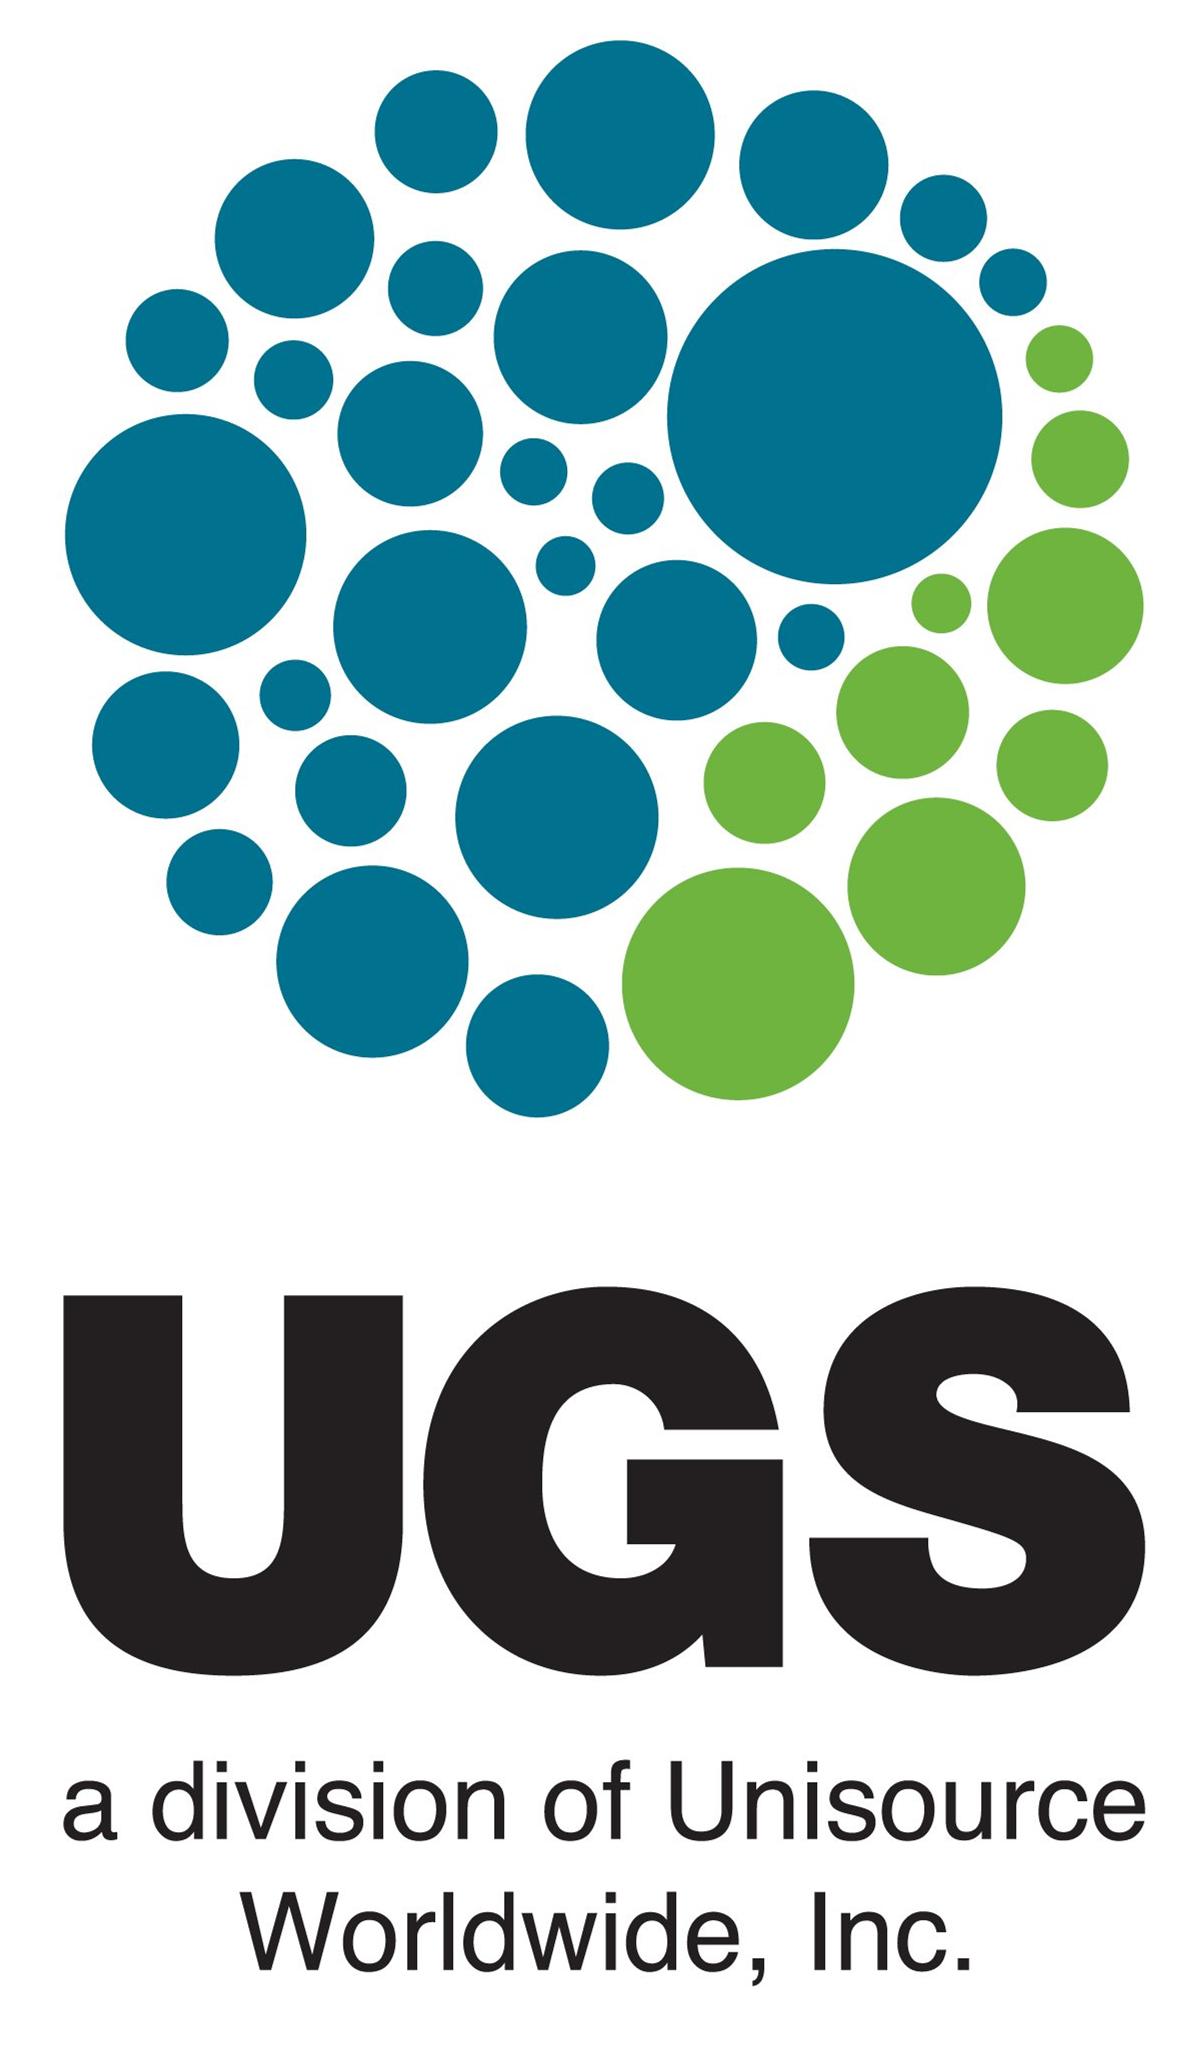  UGS A DIVISION OF UNISOURCE WORLDWIDE, INC.